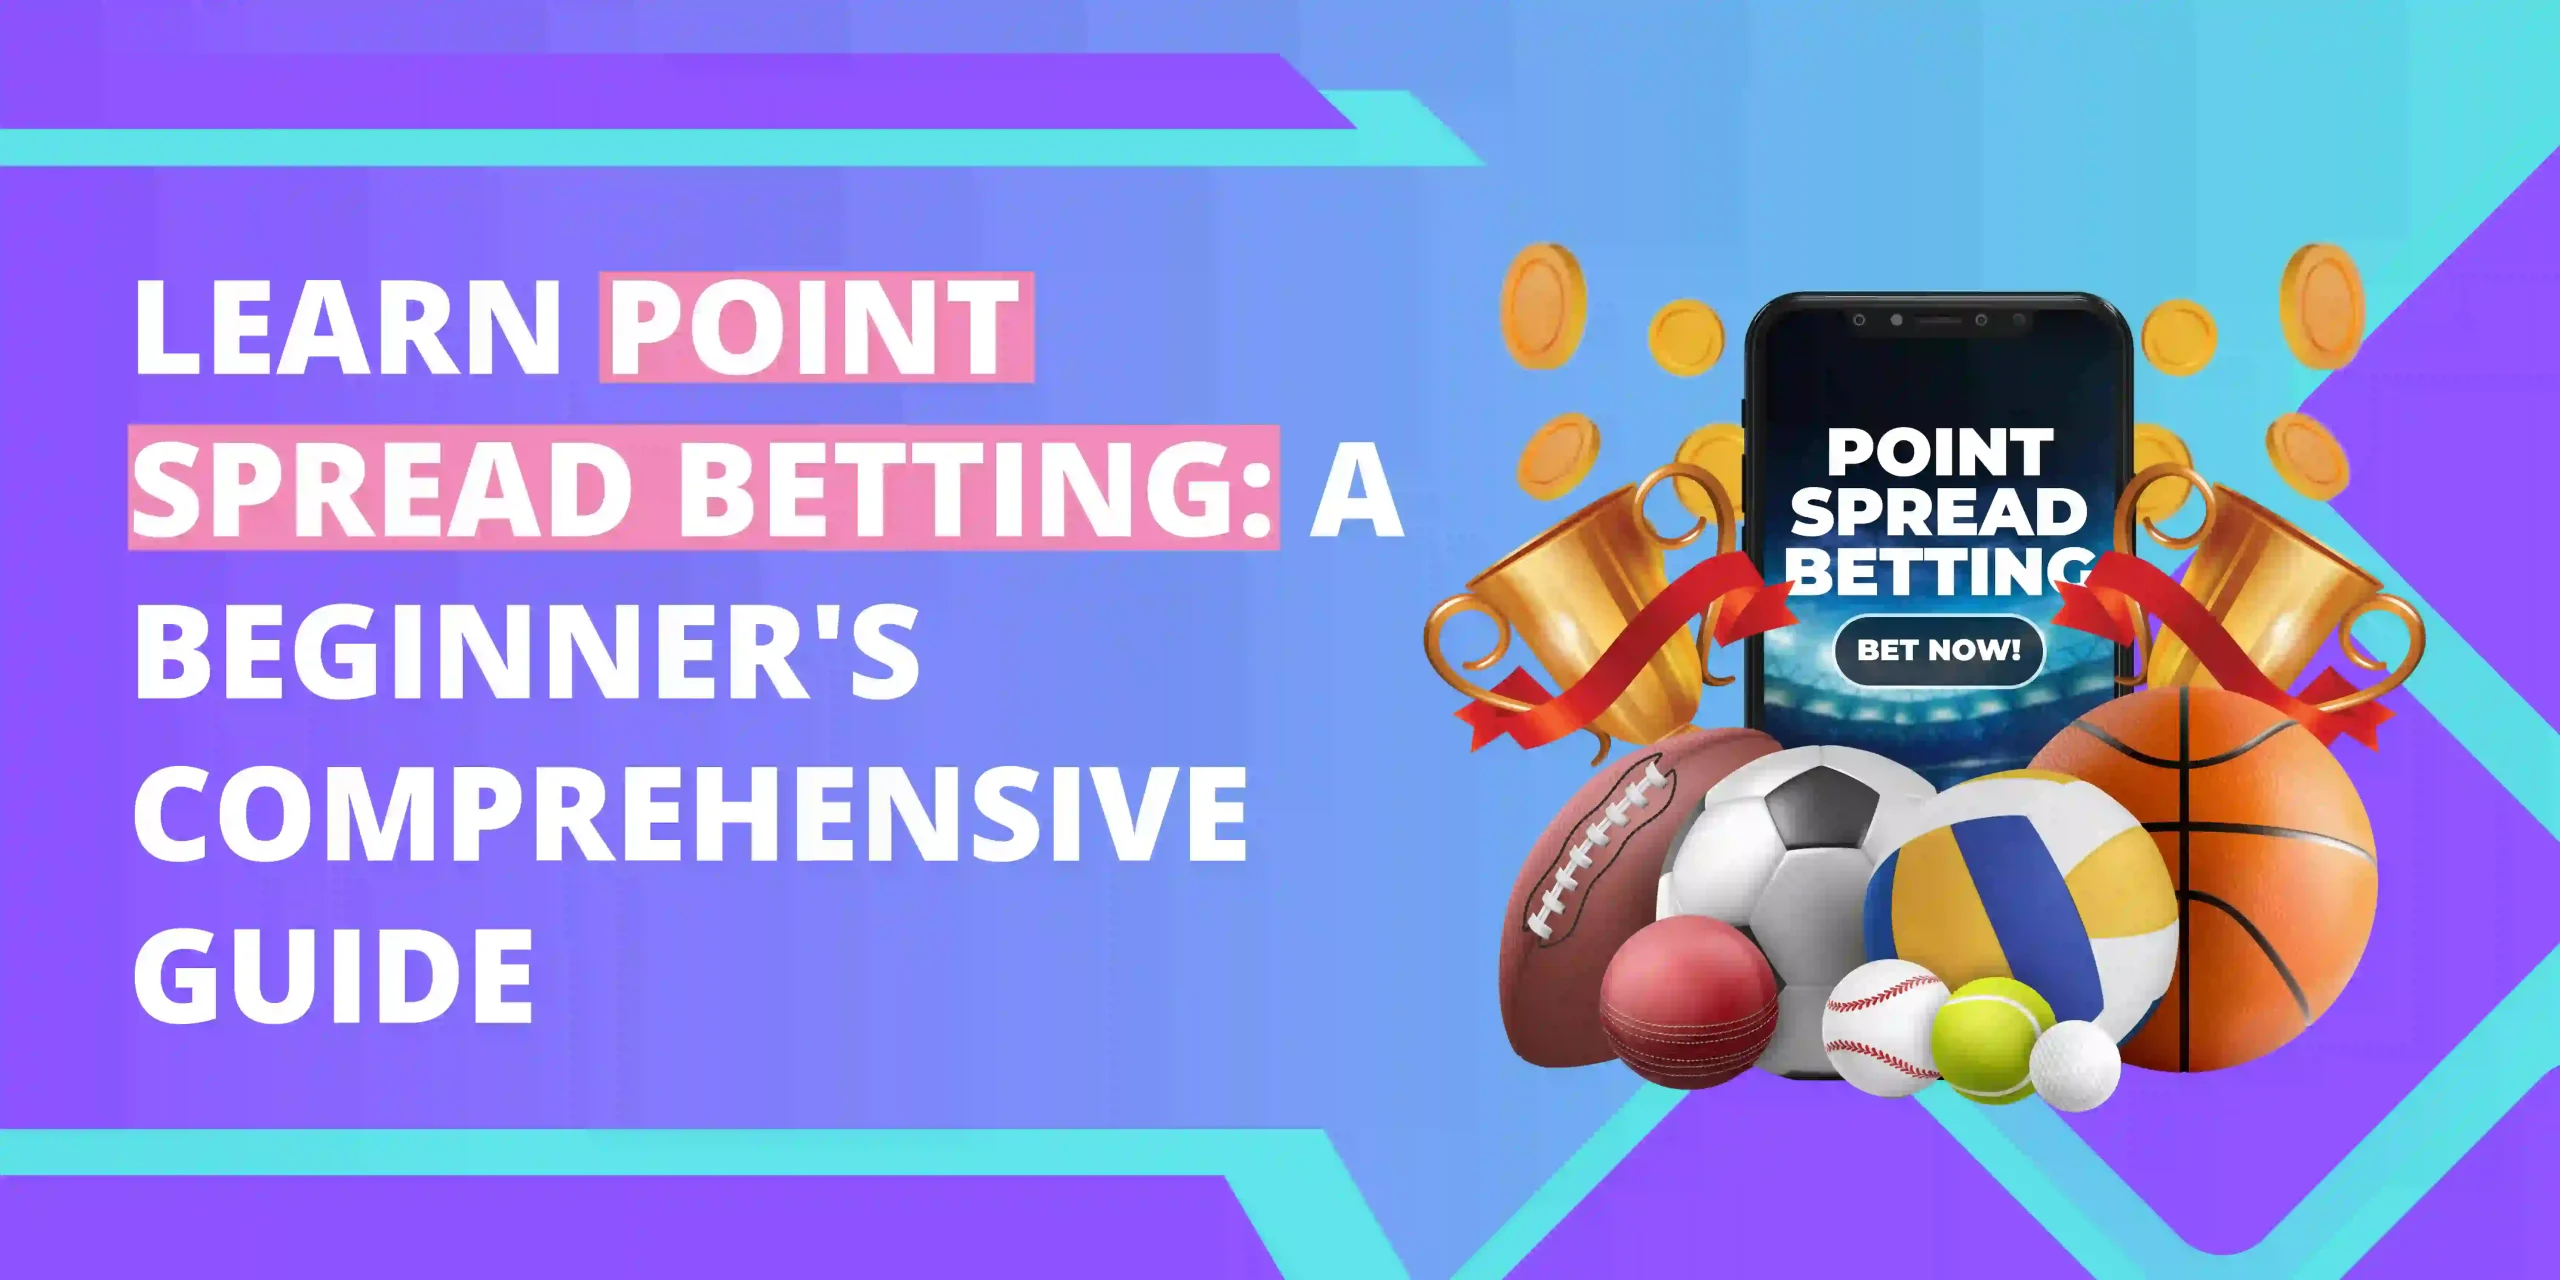 Learn Point Spread Betting: A Beginner’s Comprehensive Guide